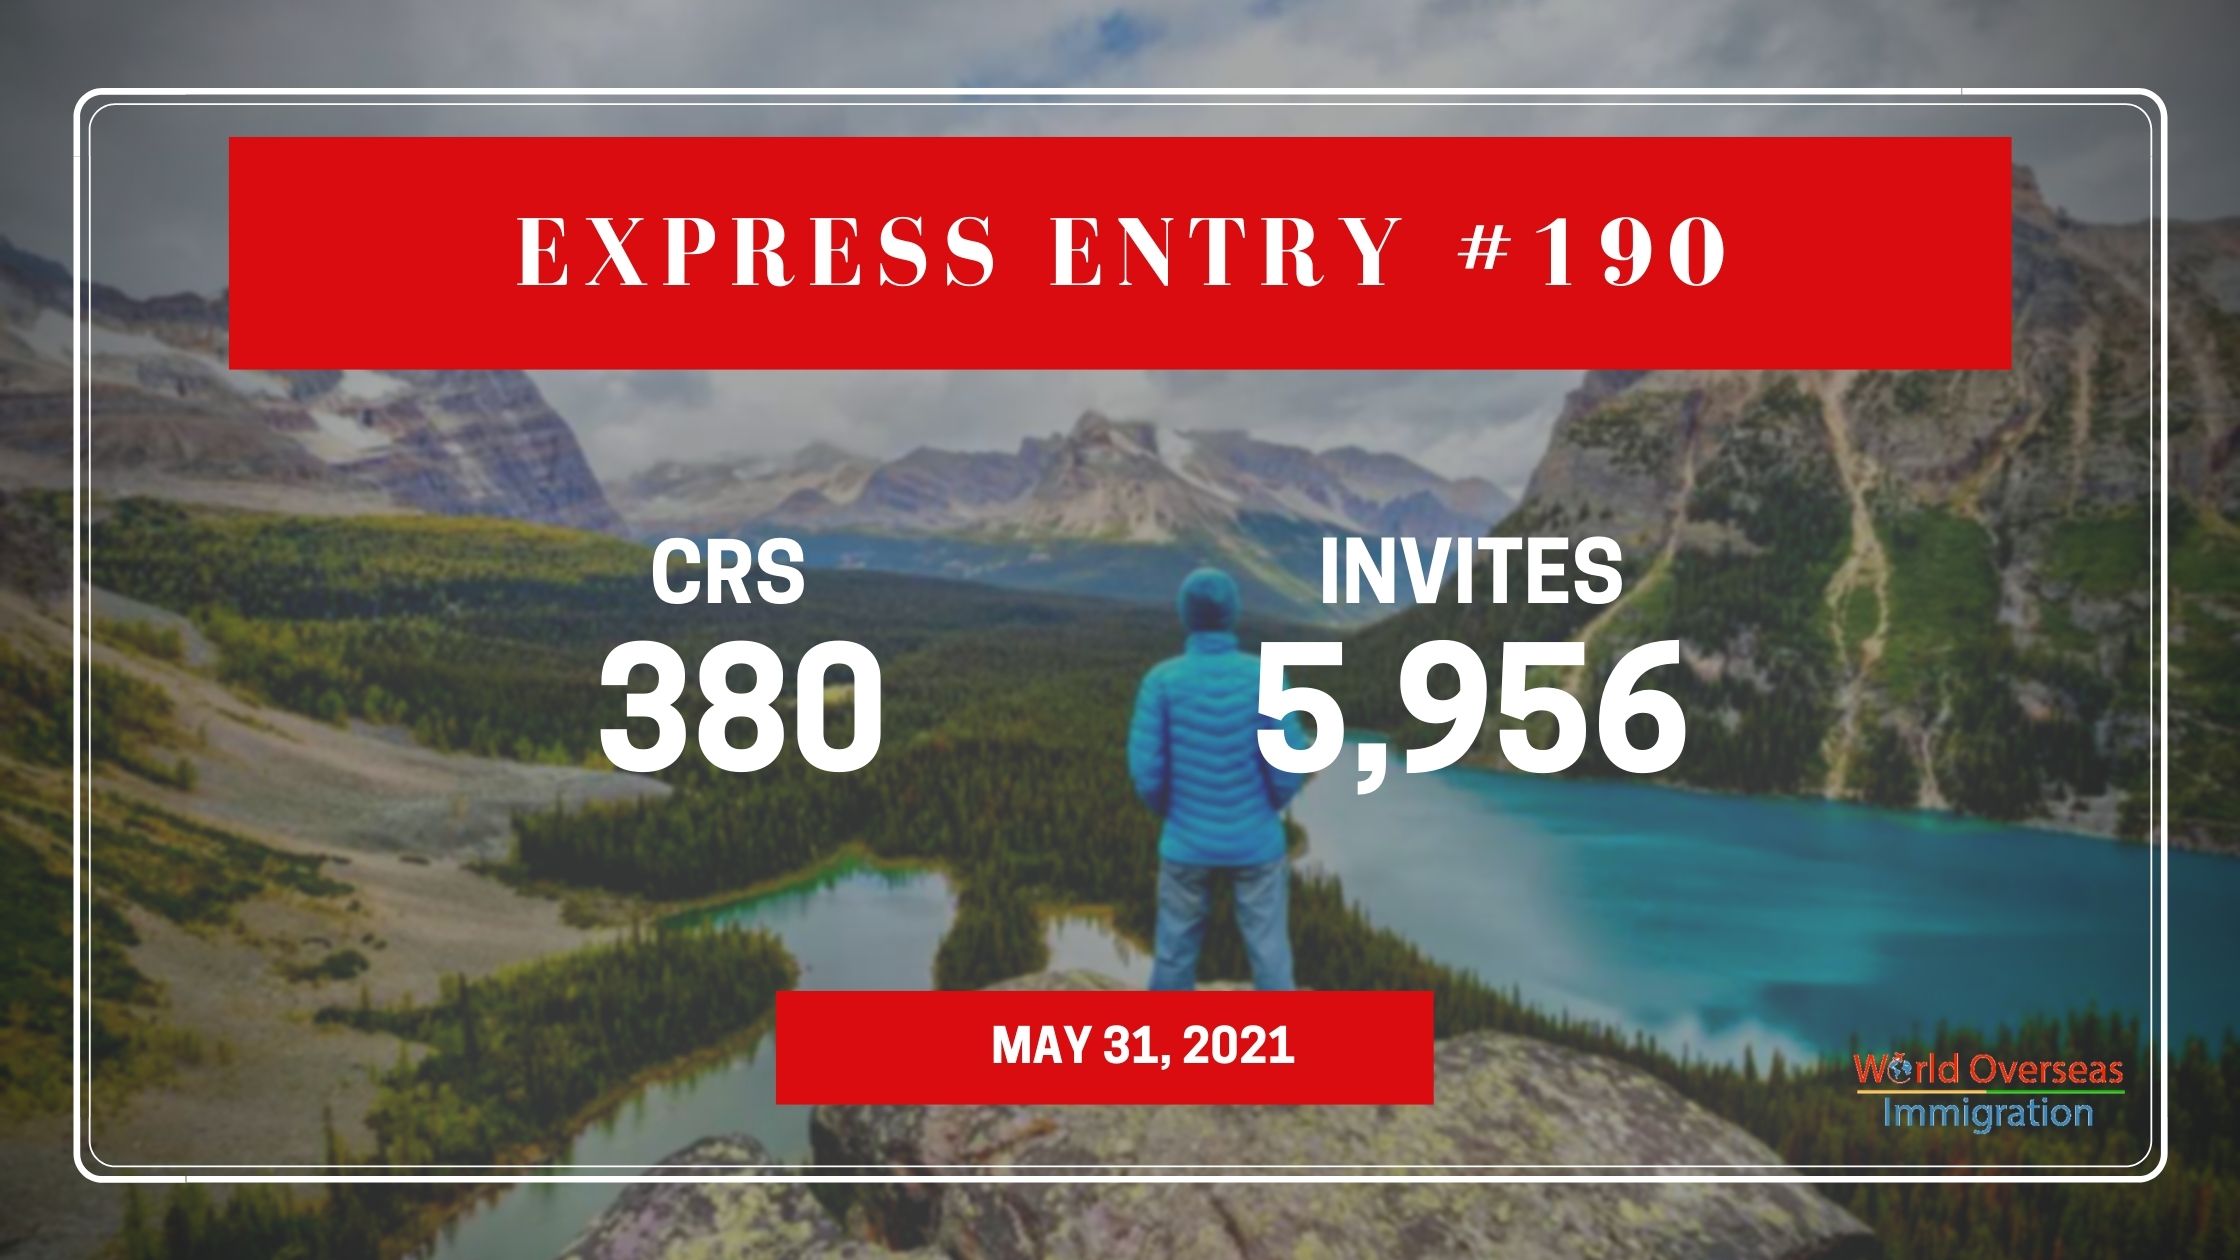 Express Entry #190: Canada invited 5,956 immigration candidates